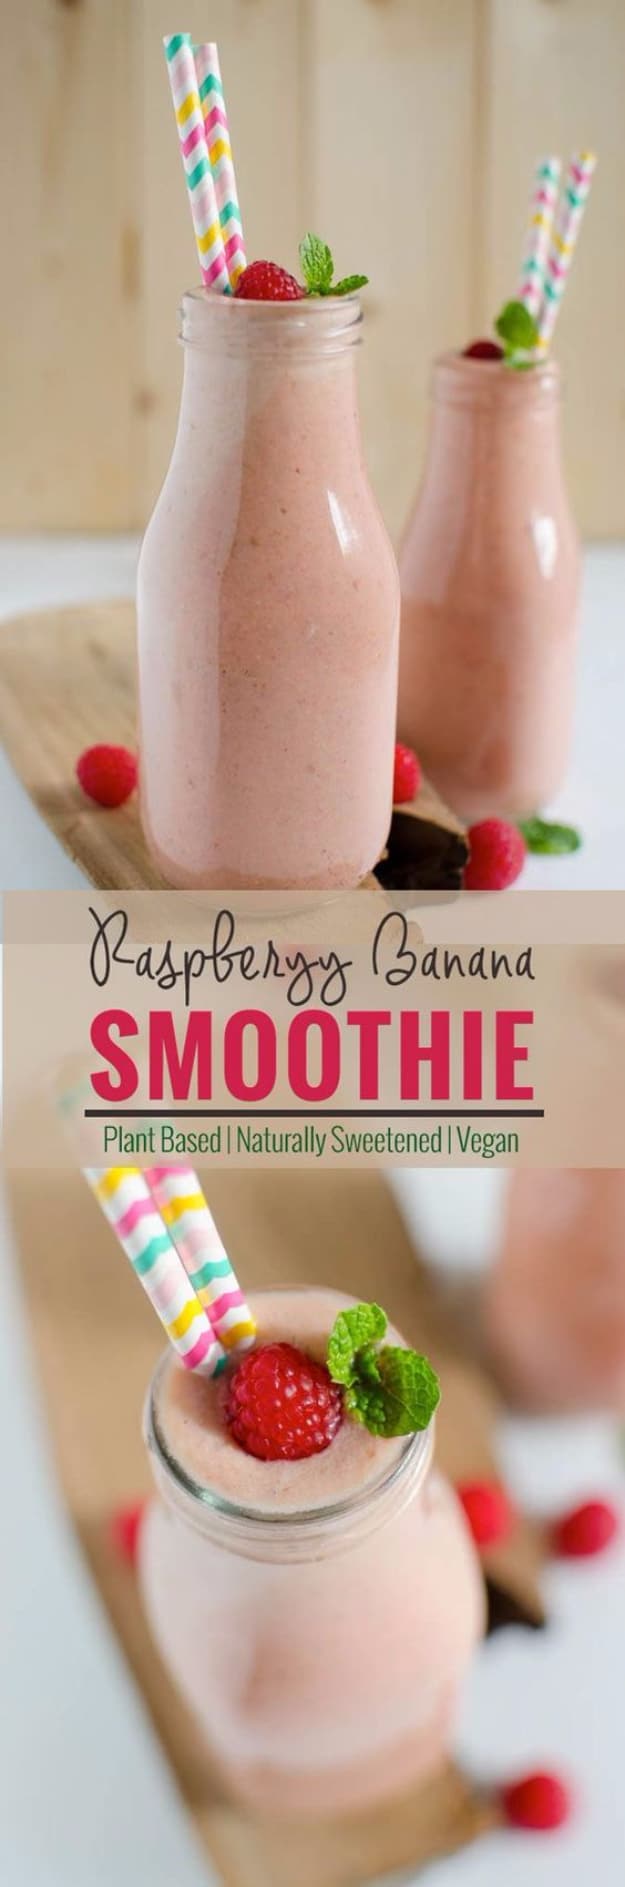 Healthy Smoothie Recipes - Super Easy Tasty Raspberry Banana Smoothie - Easy ideas perfect for breakfast, energy. Low calorie and high protein recipes for weightloss and to lose weight. Simple homemade recipe ideas that kids love. Quick EASY morning recipes before work and school, after workout #smoothies #healthy #smoothie #healthyrecipes #recipes